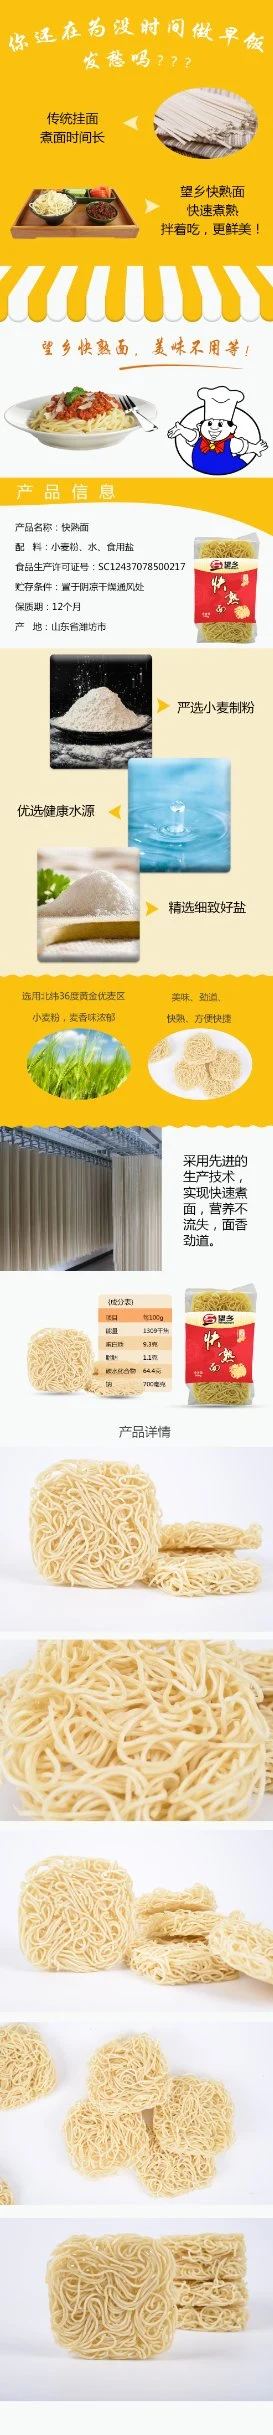 500g Quick Cooking Noodles Delicious Healthy Food Quick Cooking Noodle